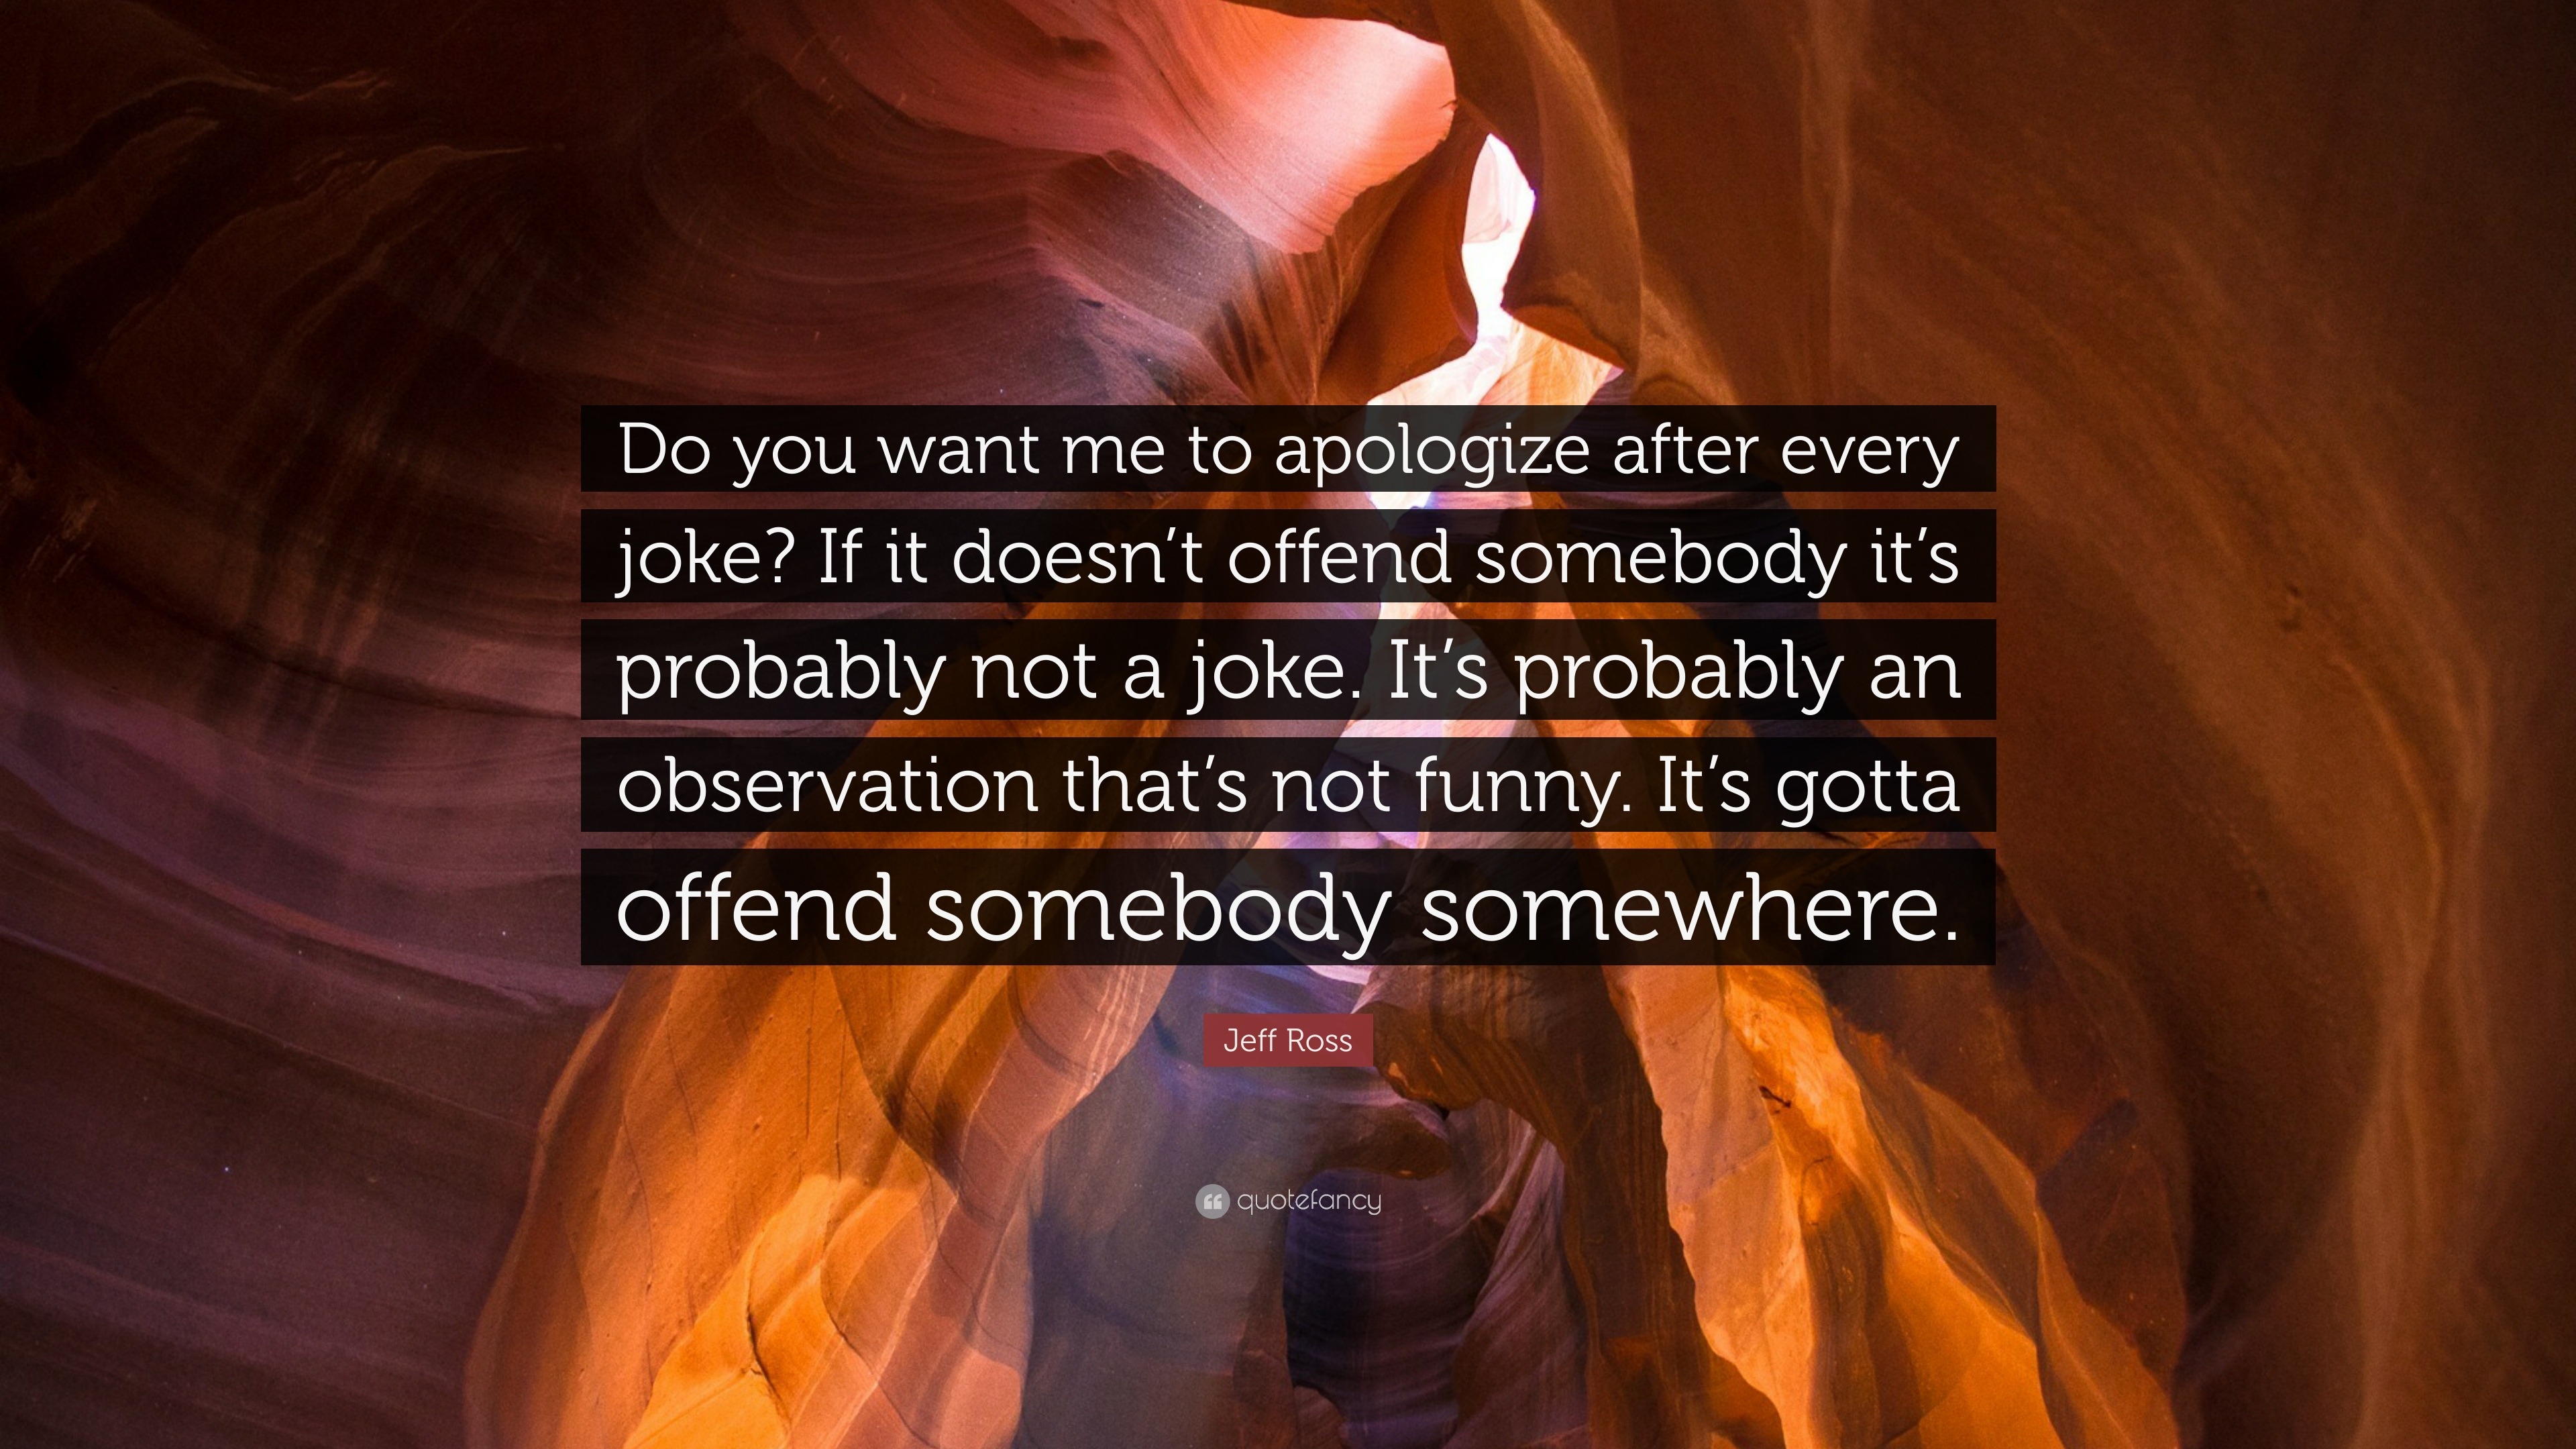 Jeff Ross Quote: “Do you want me to apologize after every joke? If it  doesn't offend somebody it's probably not a joke. It's probably an o...”